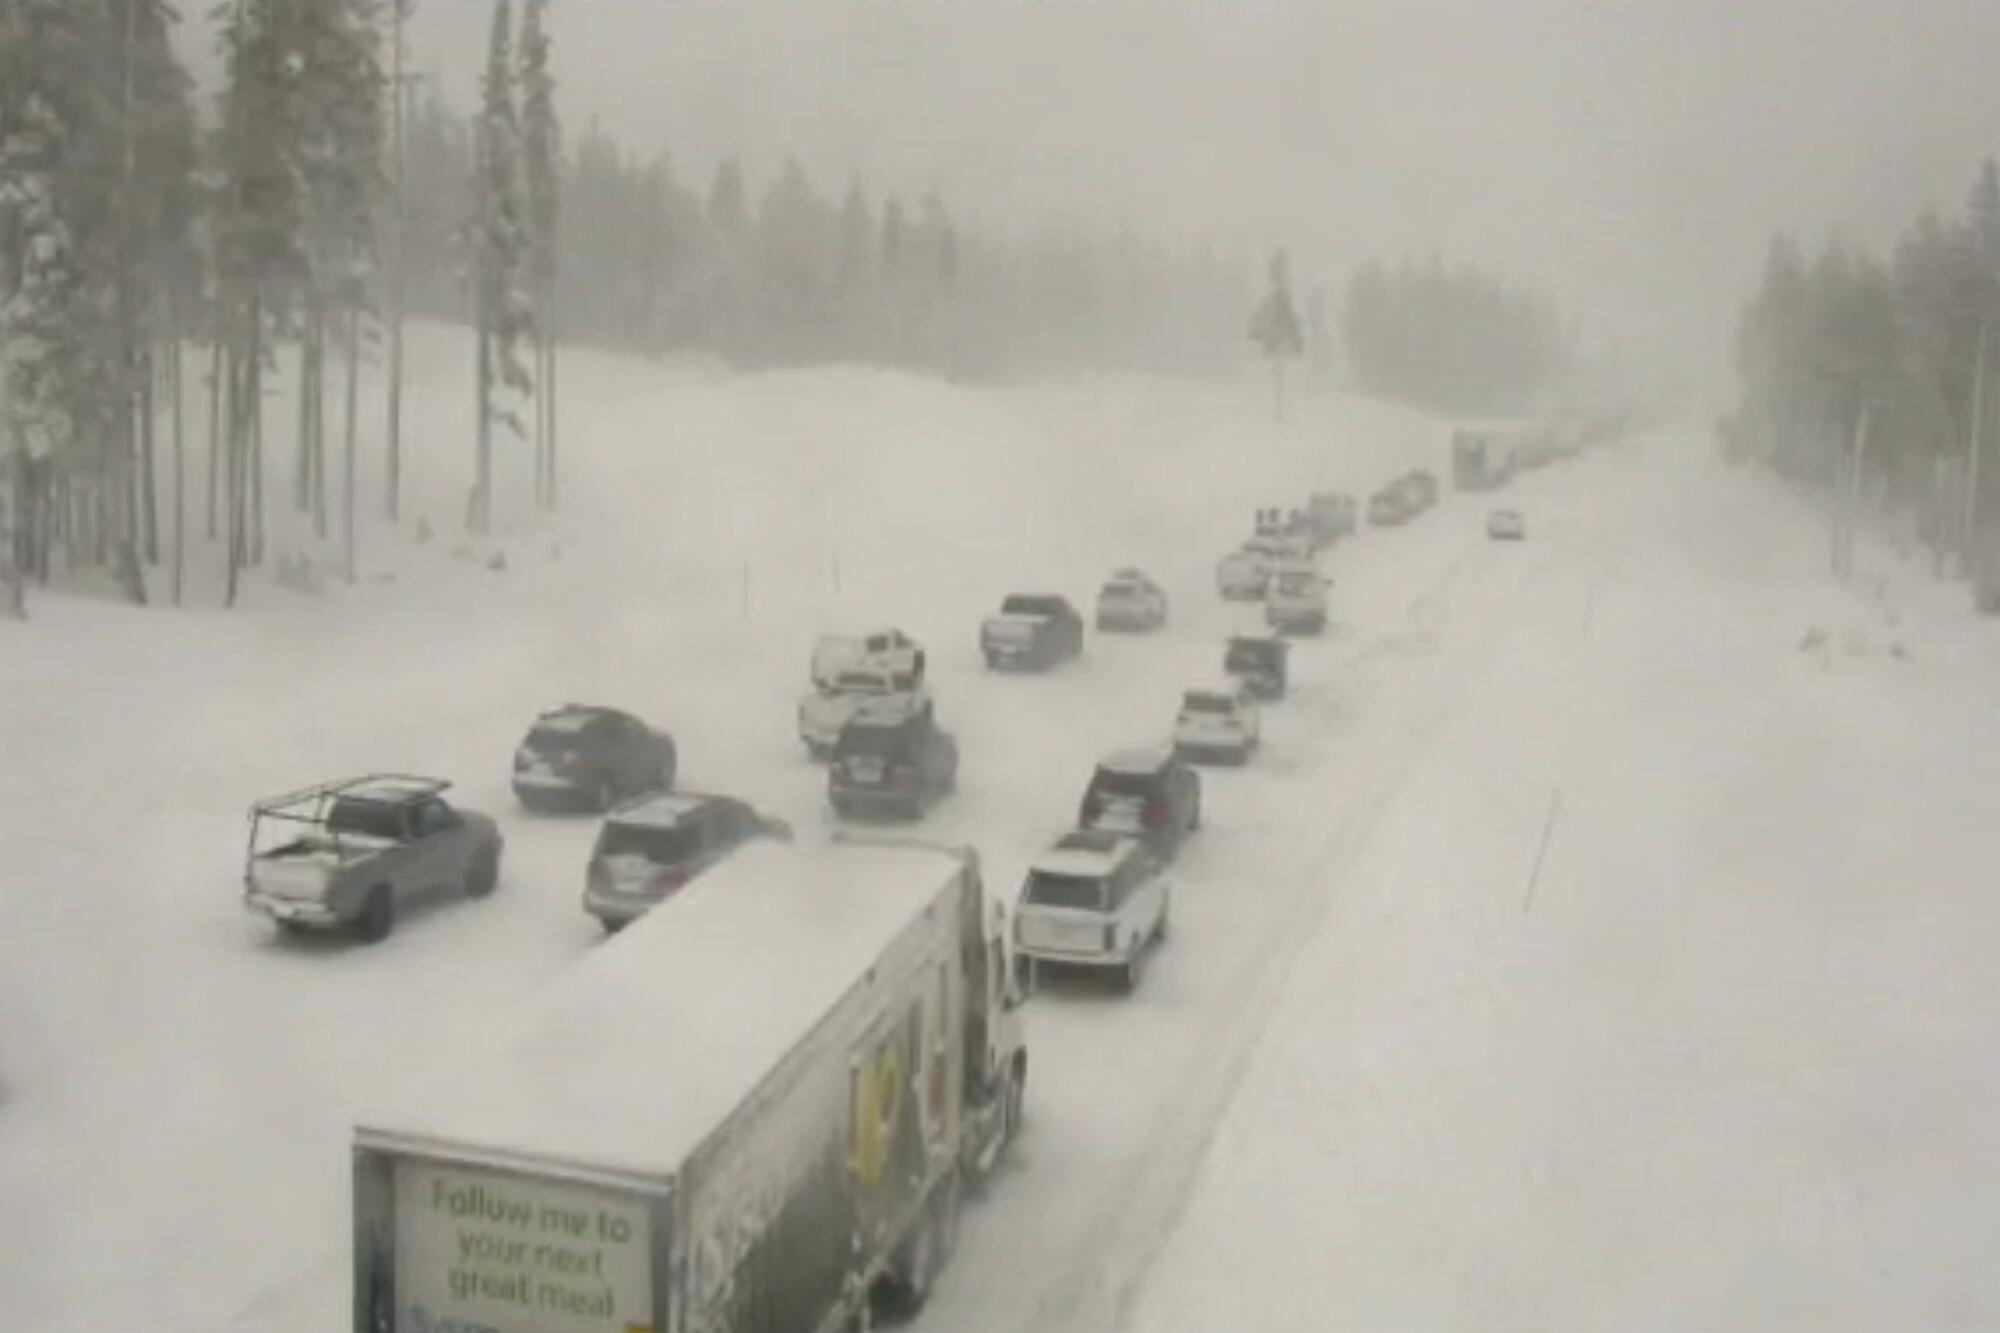 Traffic stopped on a snow-covered highway